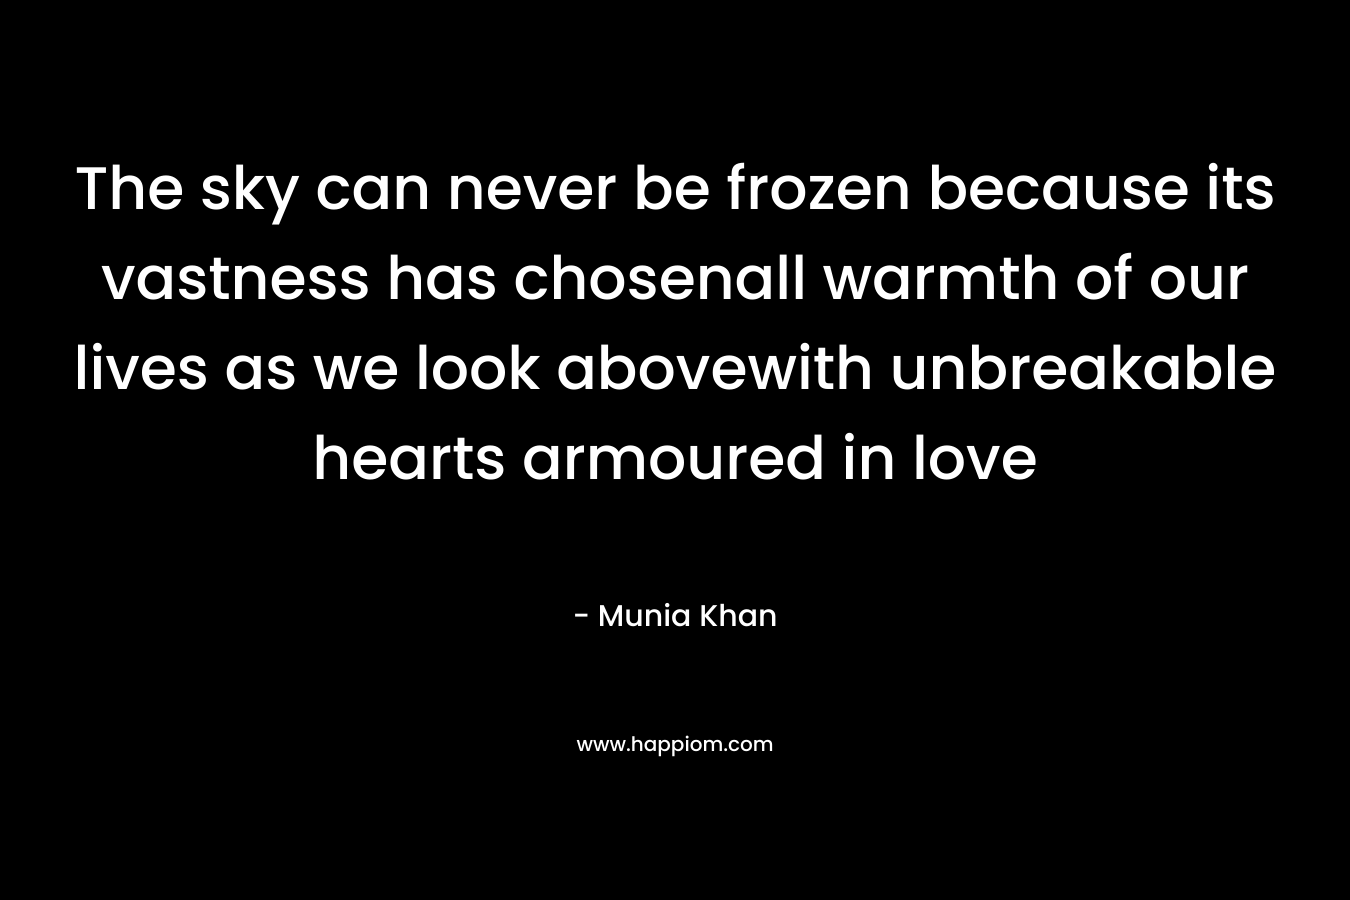 The sky can never be frozen because its vastness has chosenall warmth of our lives as we look abovewith unbreakable hearts armoured in love – Munia Khan